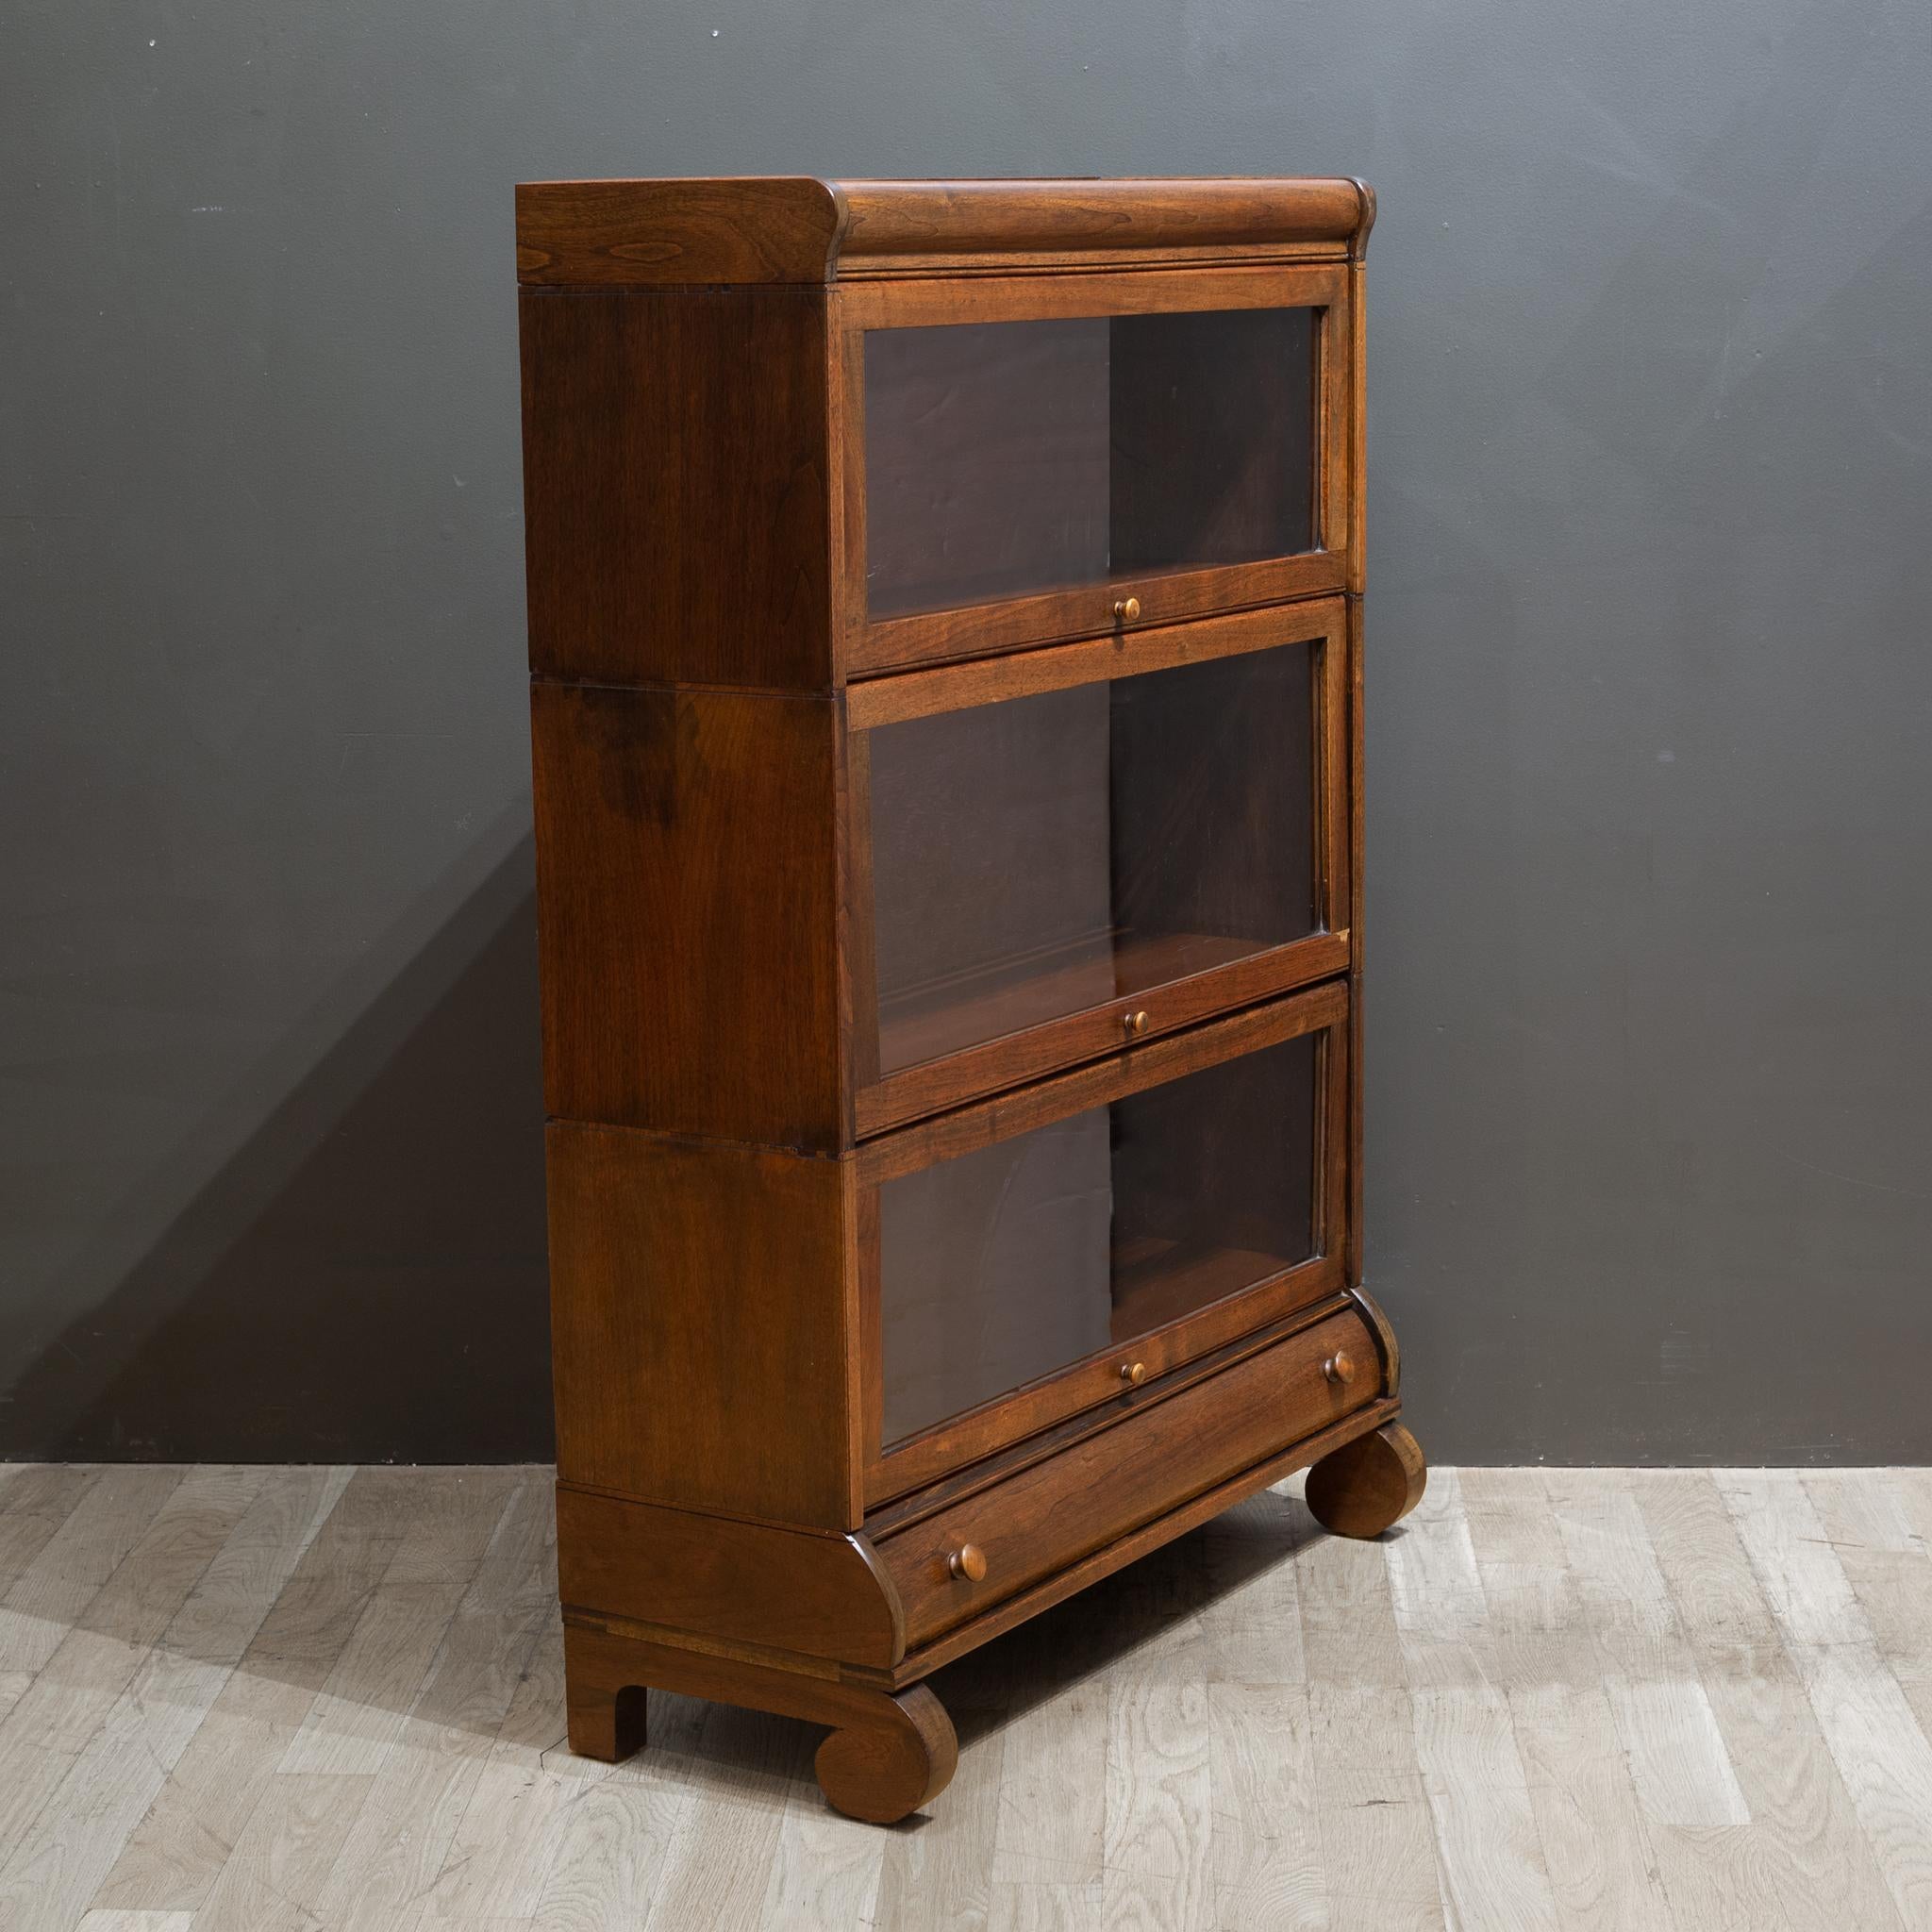 20th Century Early 20th C. Lundstrom 3 Stack Lawyer's Bookcase c.1900